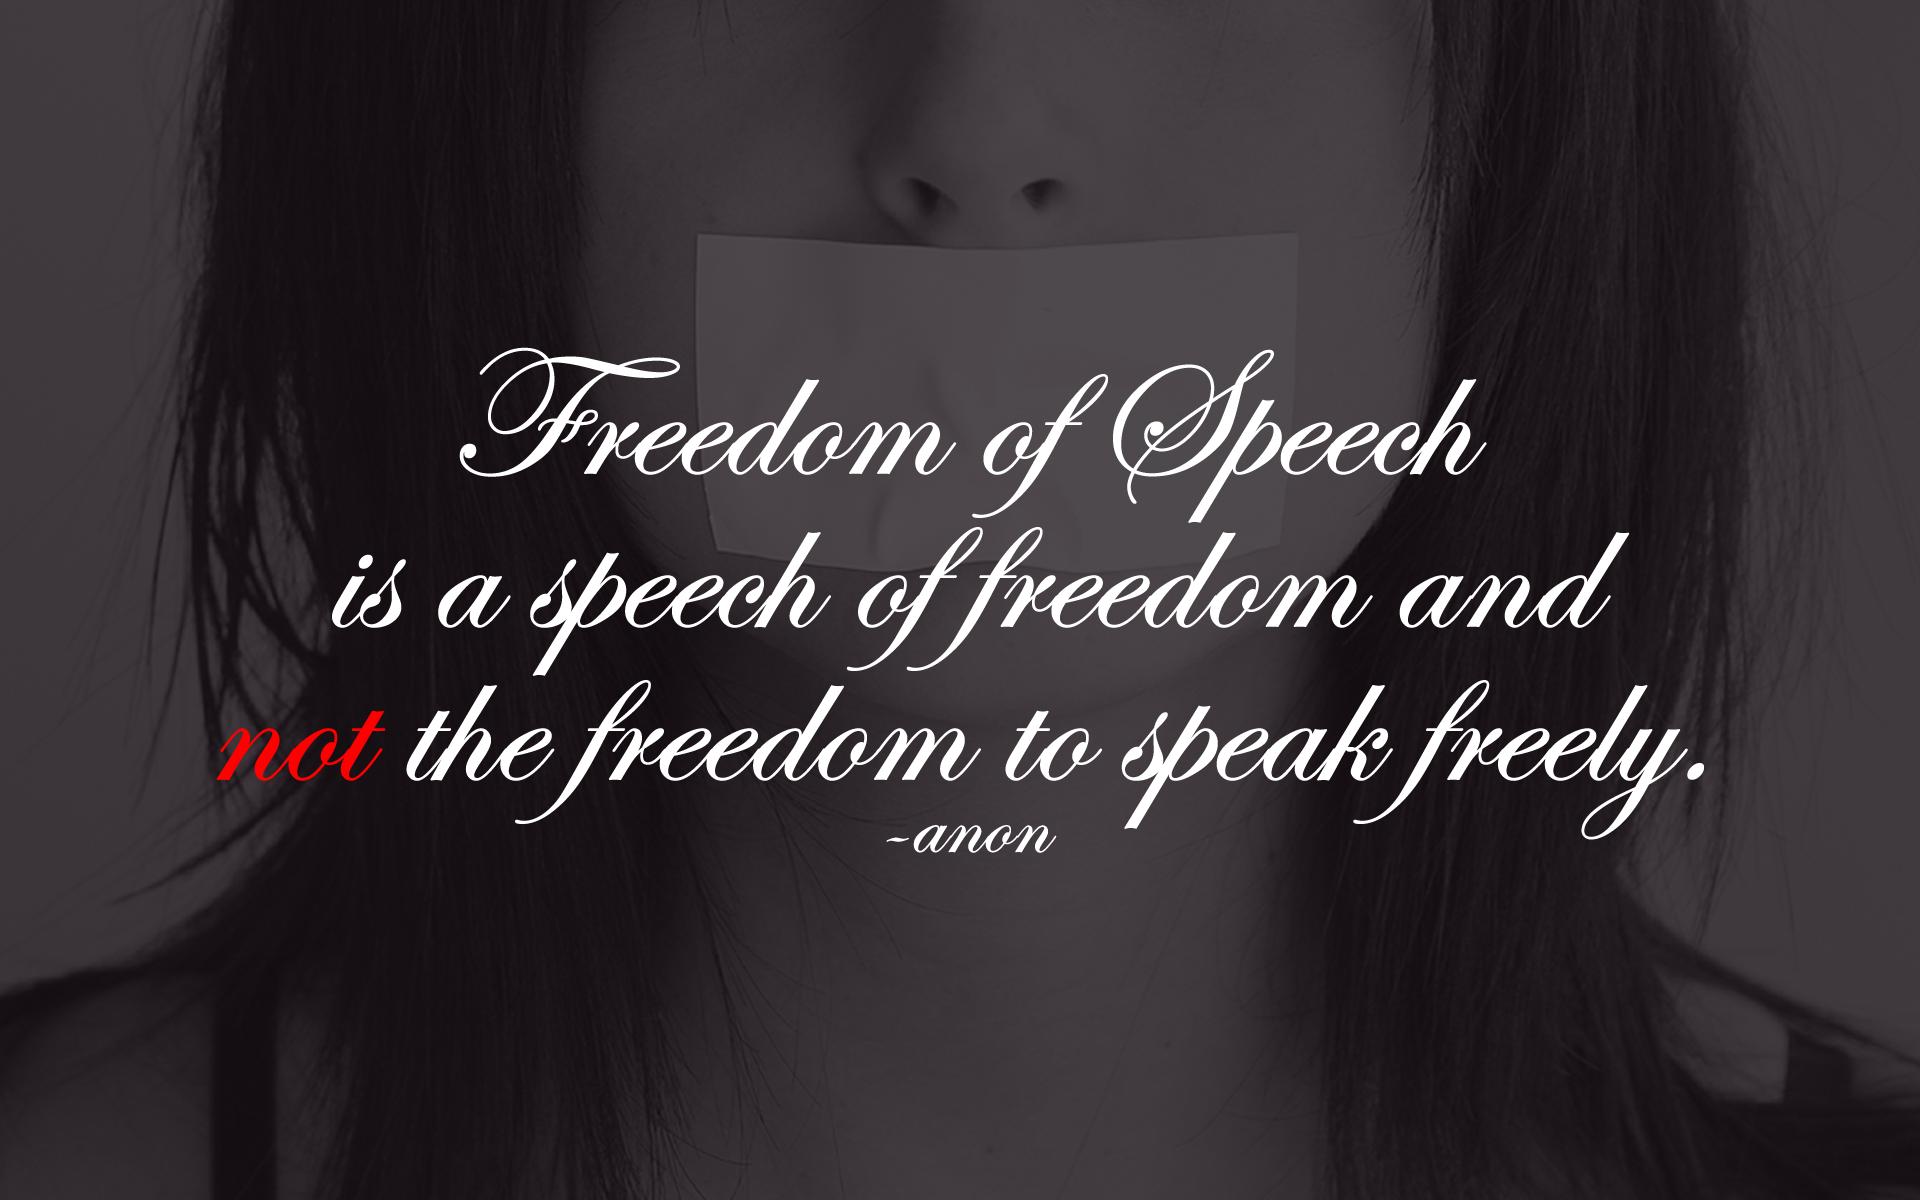 Famous quotes about 'Freedom Of Speech' - Sualci Quotes 2019